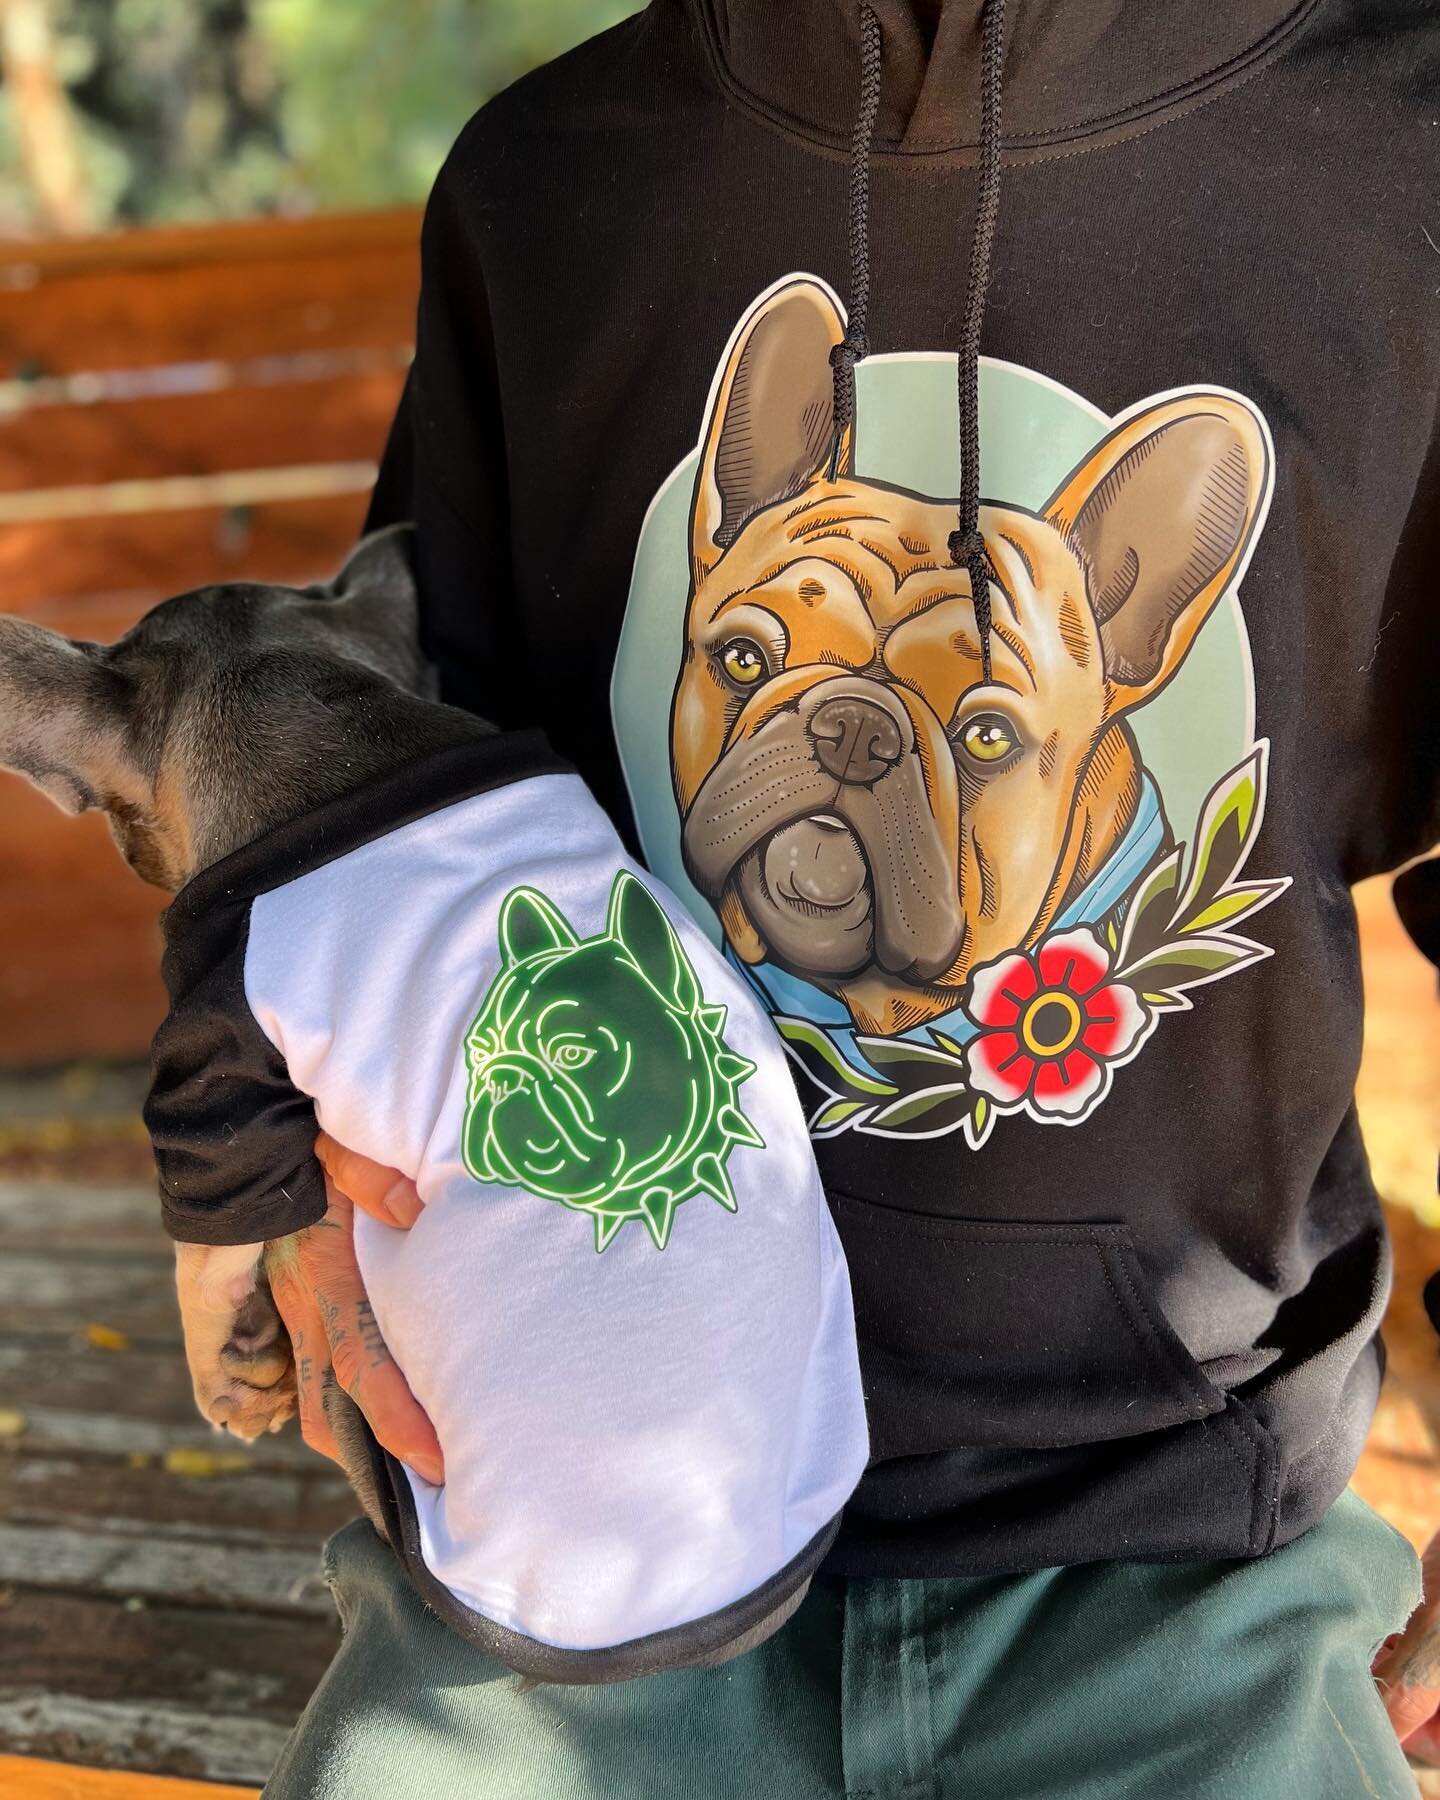 Dragon in the Neon frenchie Raglan shirt and Papa in the Ozu hoodie❤️❤️❤️❤️. get yours! LINK IN BIO
.
.
#dogclothes #frenchbulldogclothing #frenchieclothing #frenchieshirt #frenchbulldoghoodie